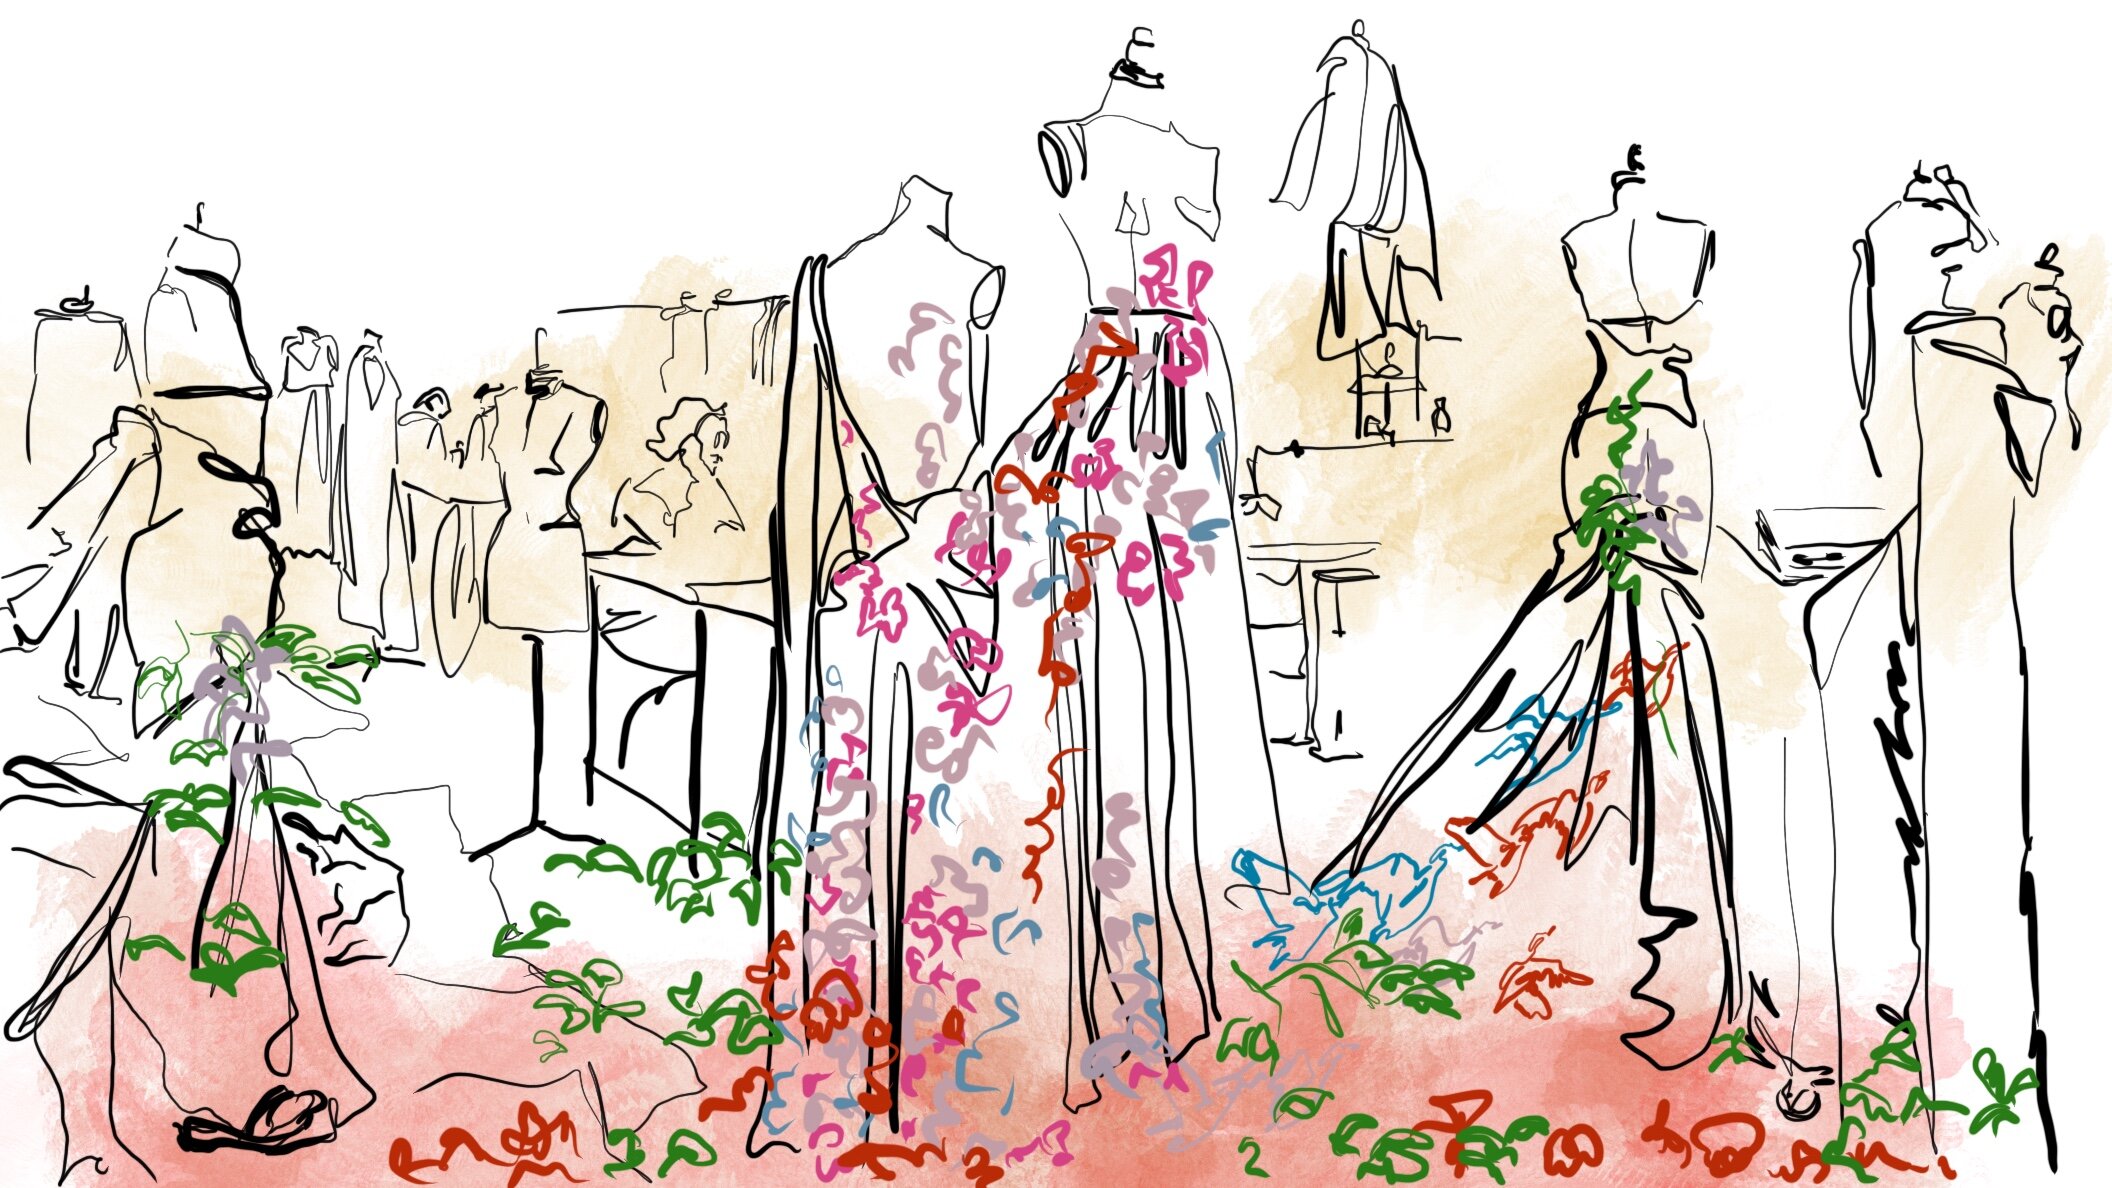   Condé Nast, The Sustainable Fashion Glossary    May, 2020     “The Sustainable Fashion Glossary is our long-standing commitment to drive change in the world of fashion, design, and style, bringing together academic rigour and Condé Nast’s diverse p